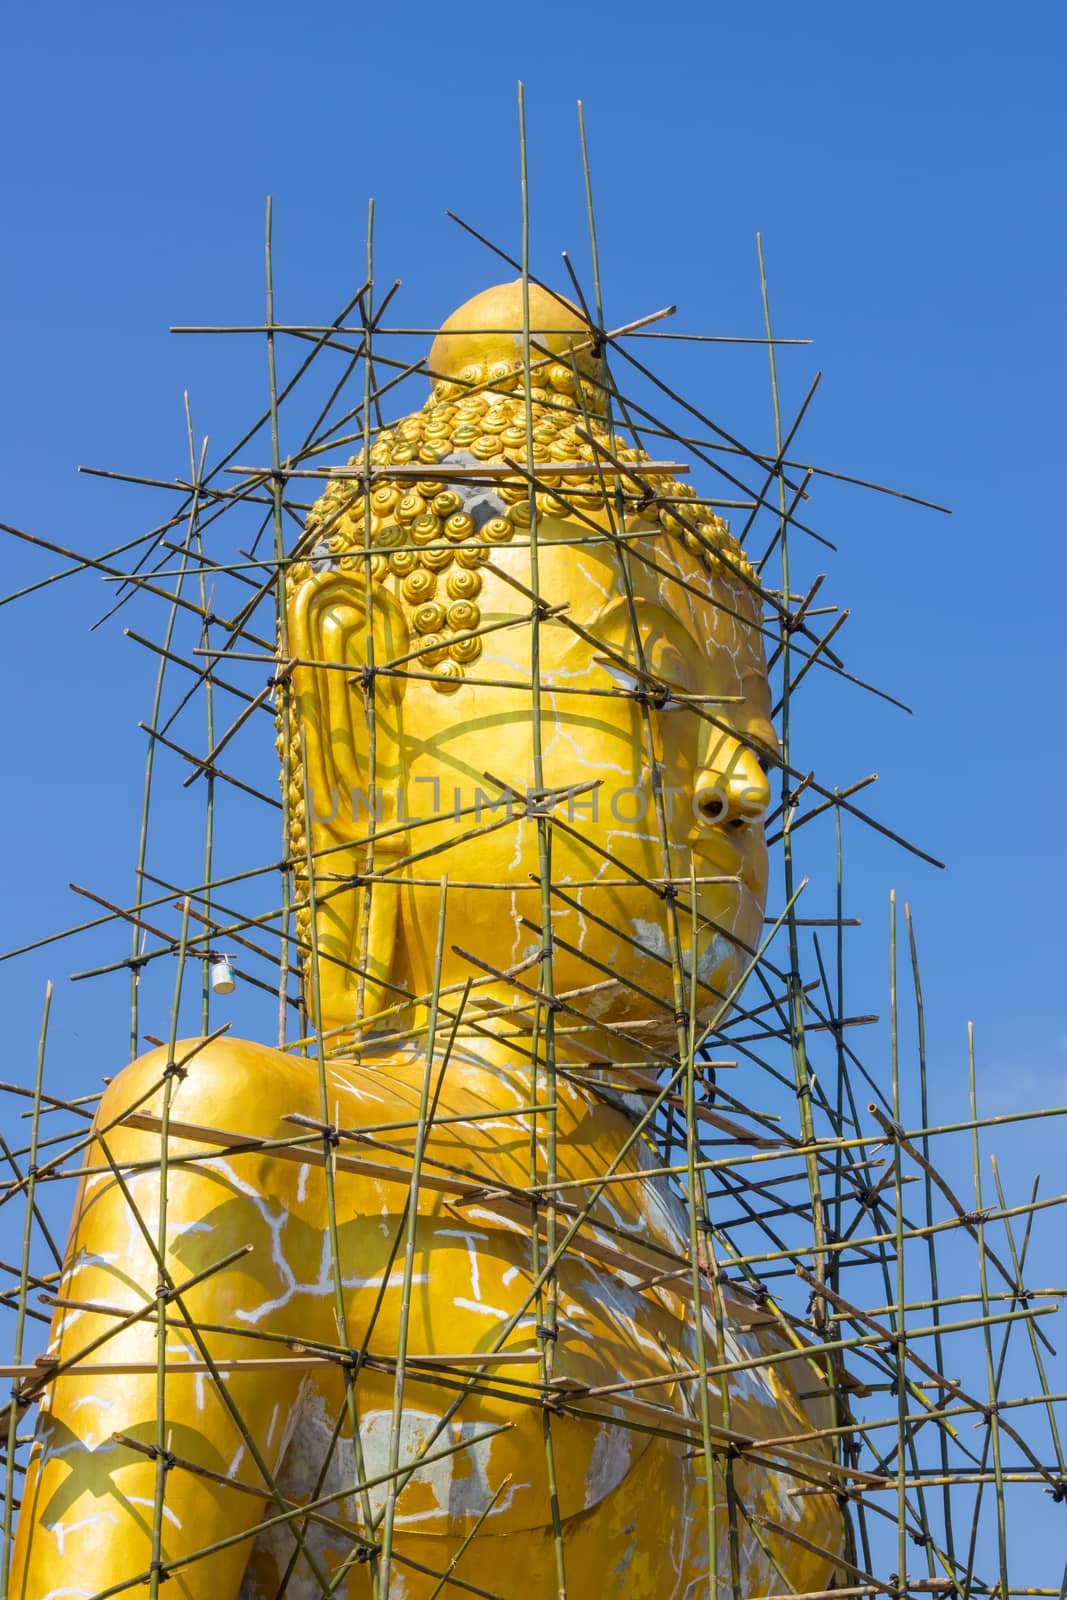 Buddha image reparation on the blue sky by a3701027